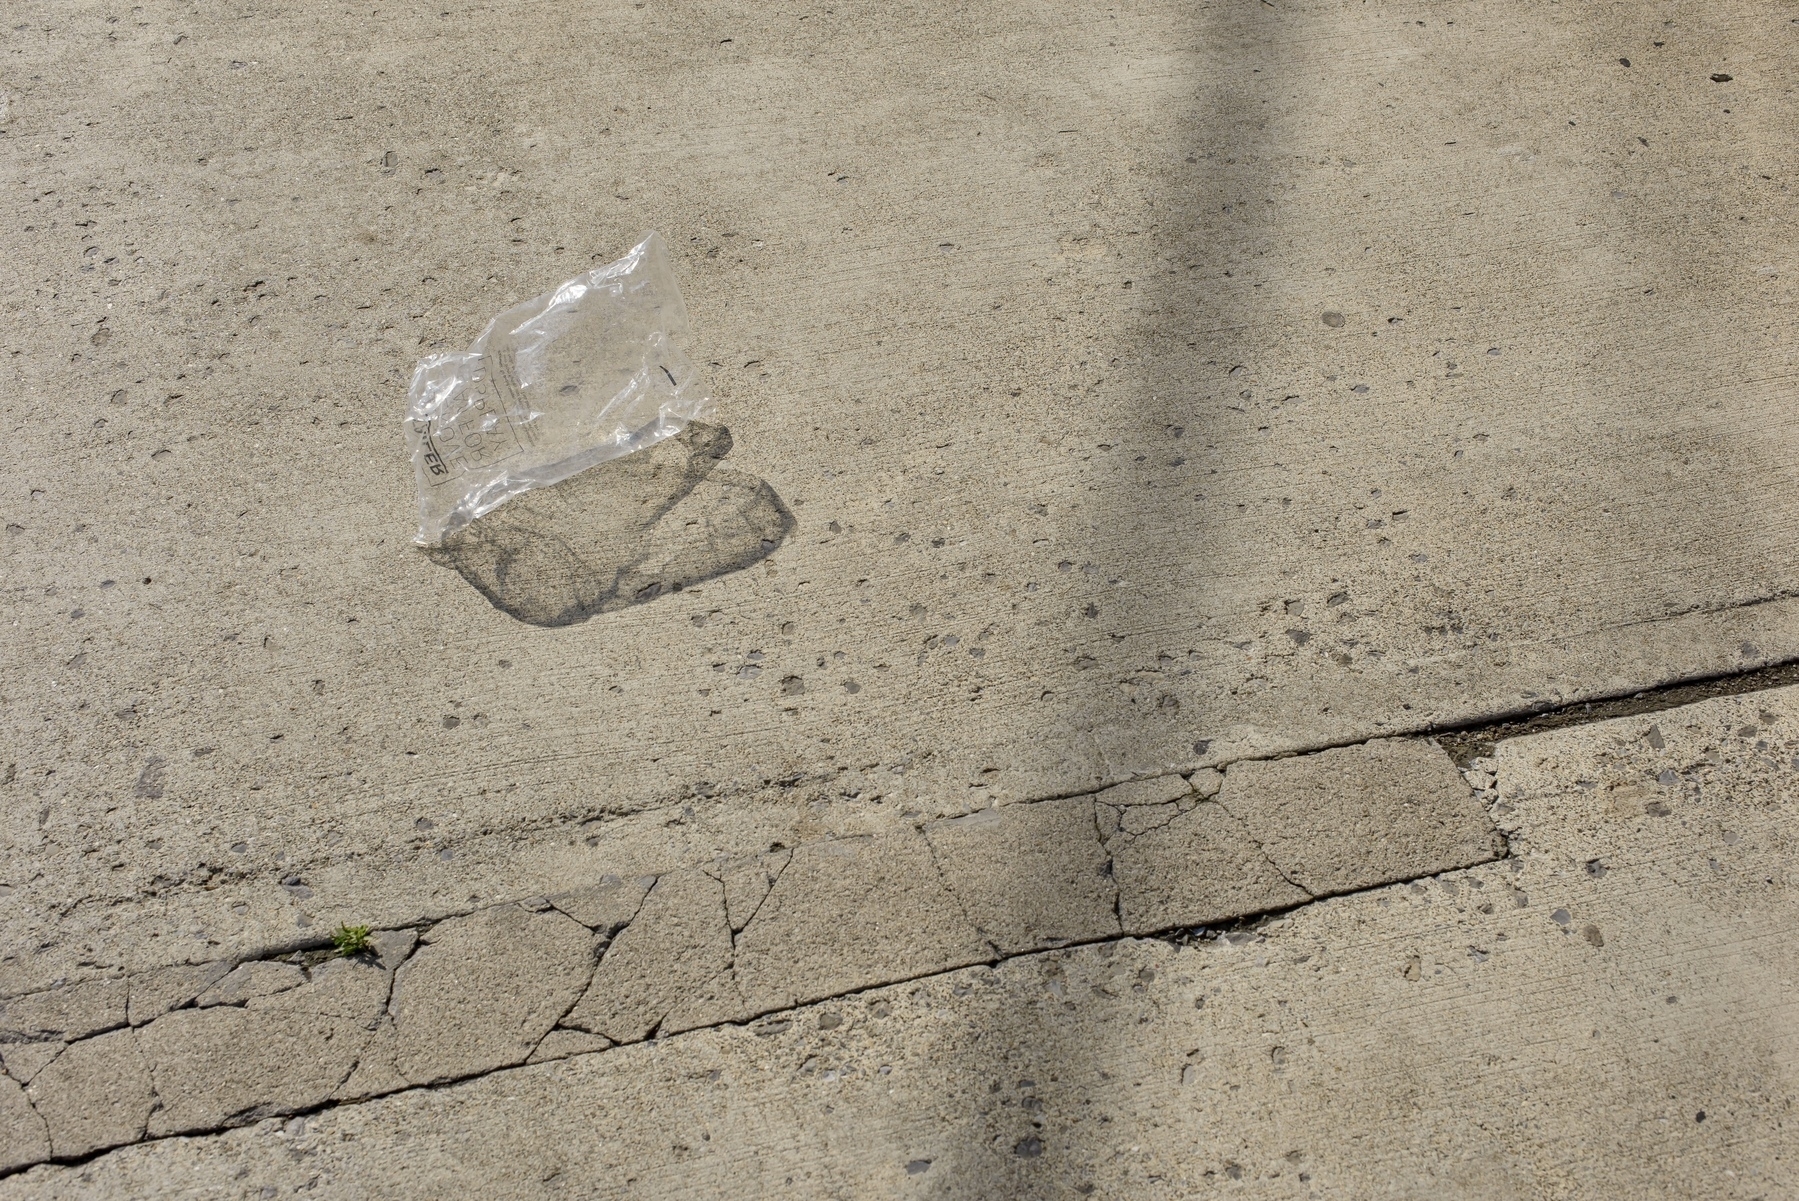 Plastic bag on concrete sidewalk in early morning sun. Complex shadow pattern cat by the bag. Bag being blown around.